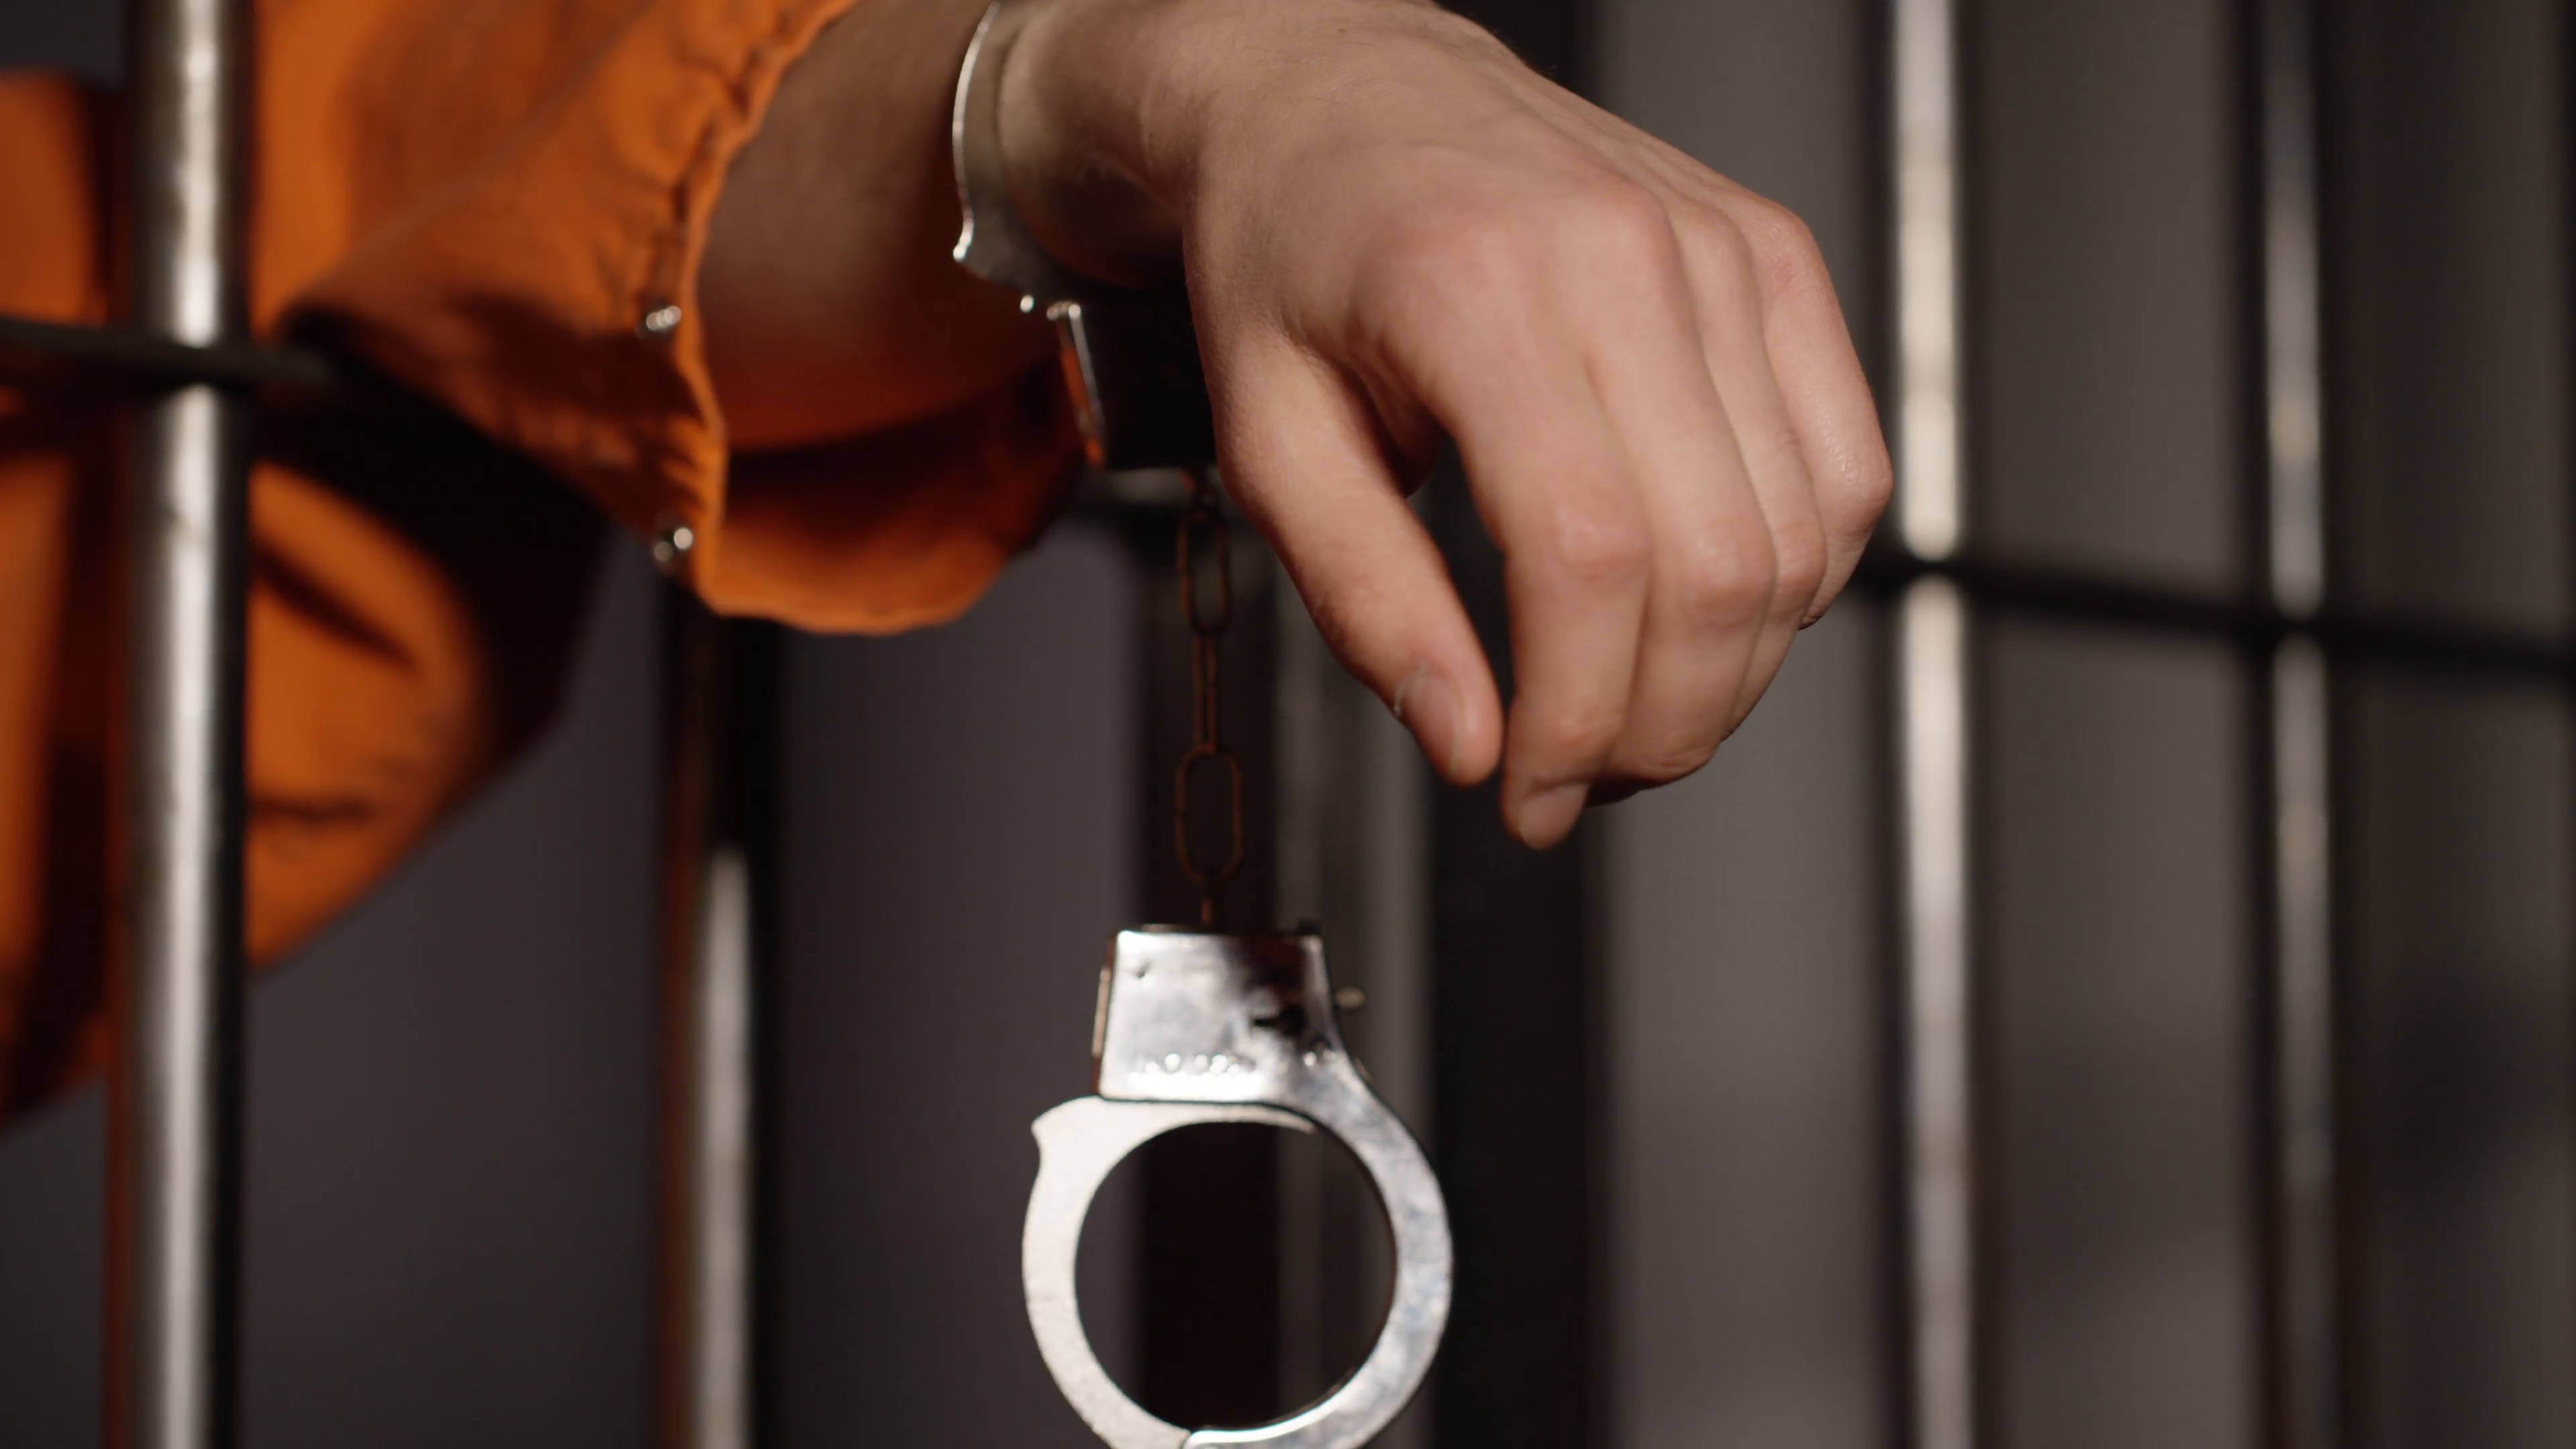 Prison cells in Jail - Handcuff dangling from man's arm in cell ...